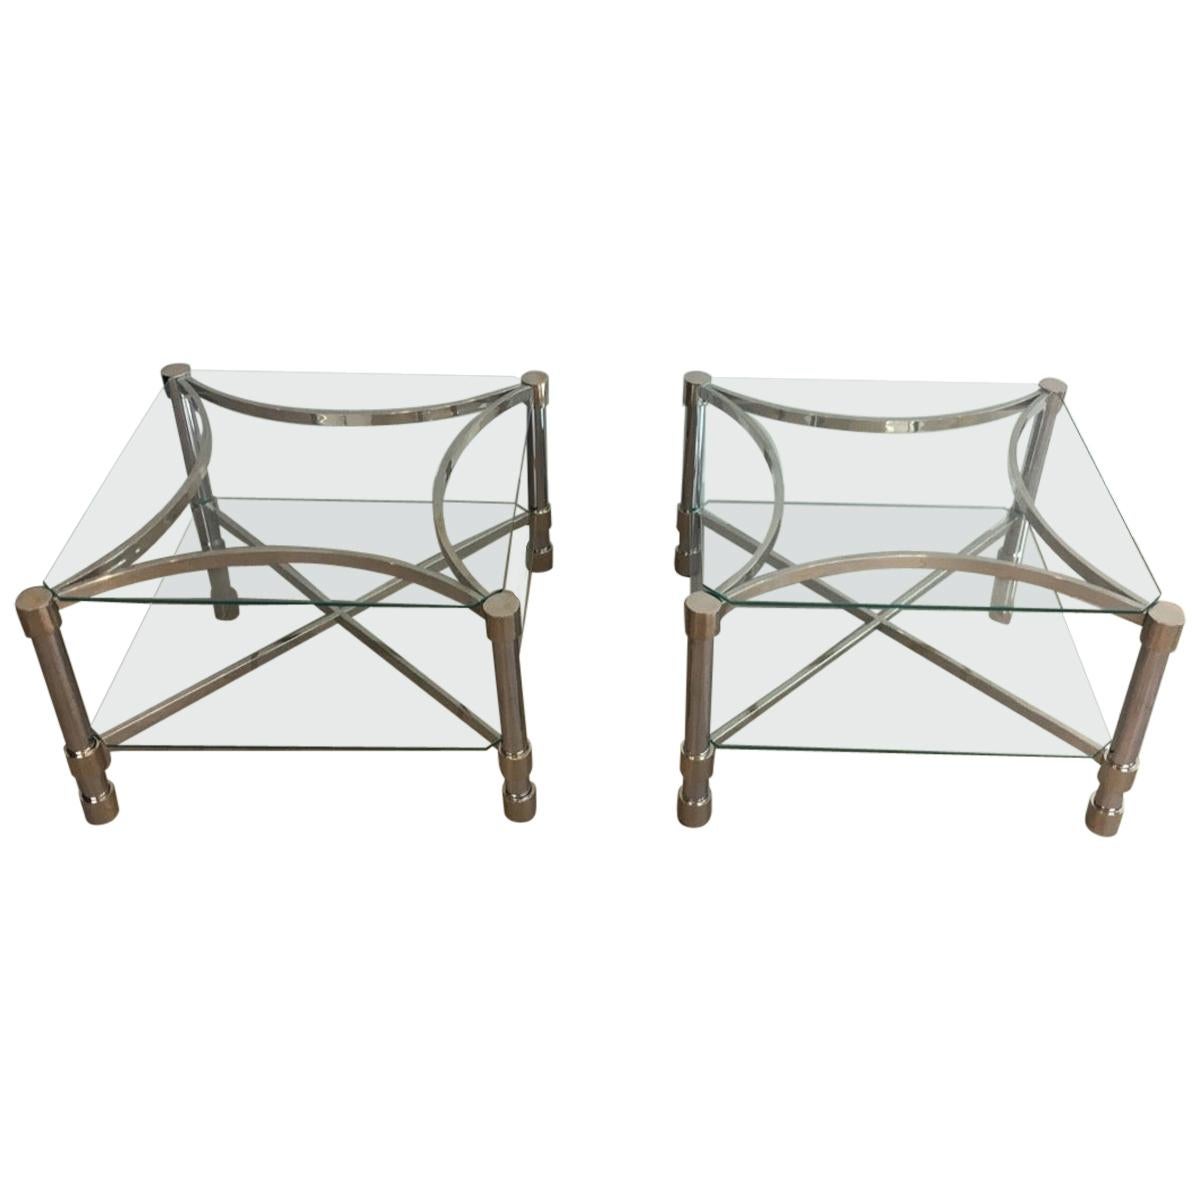 Pair of Unusual Side Tables Made of Chrome and Glass, French, circa 1970 For Sale